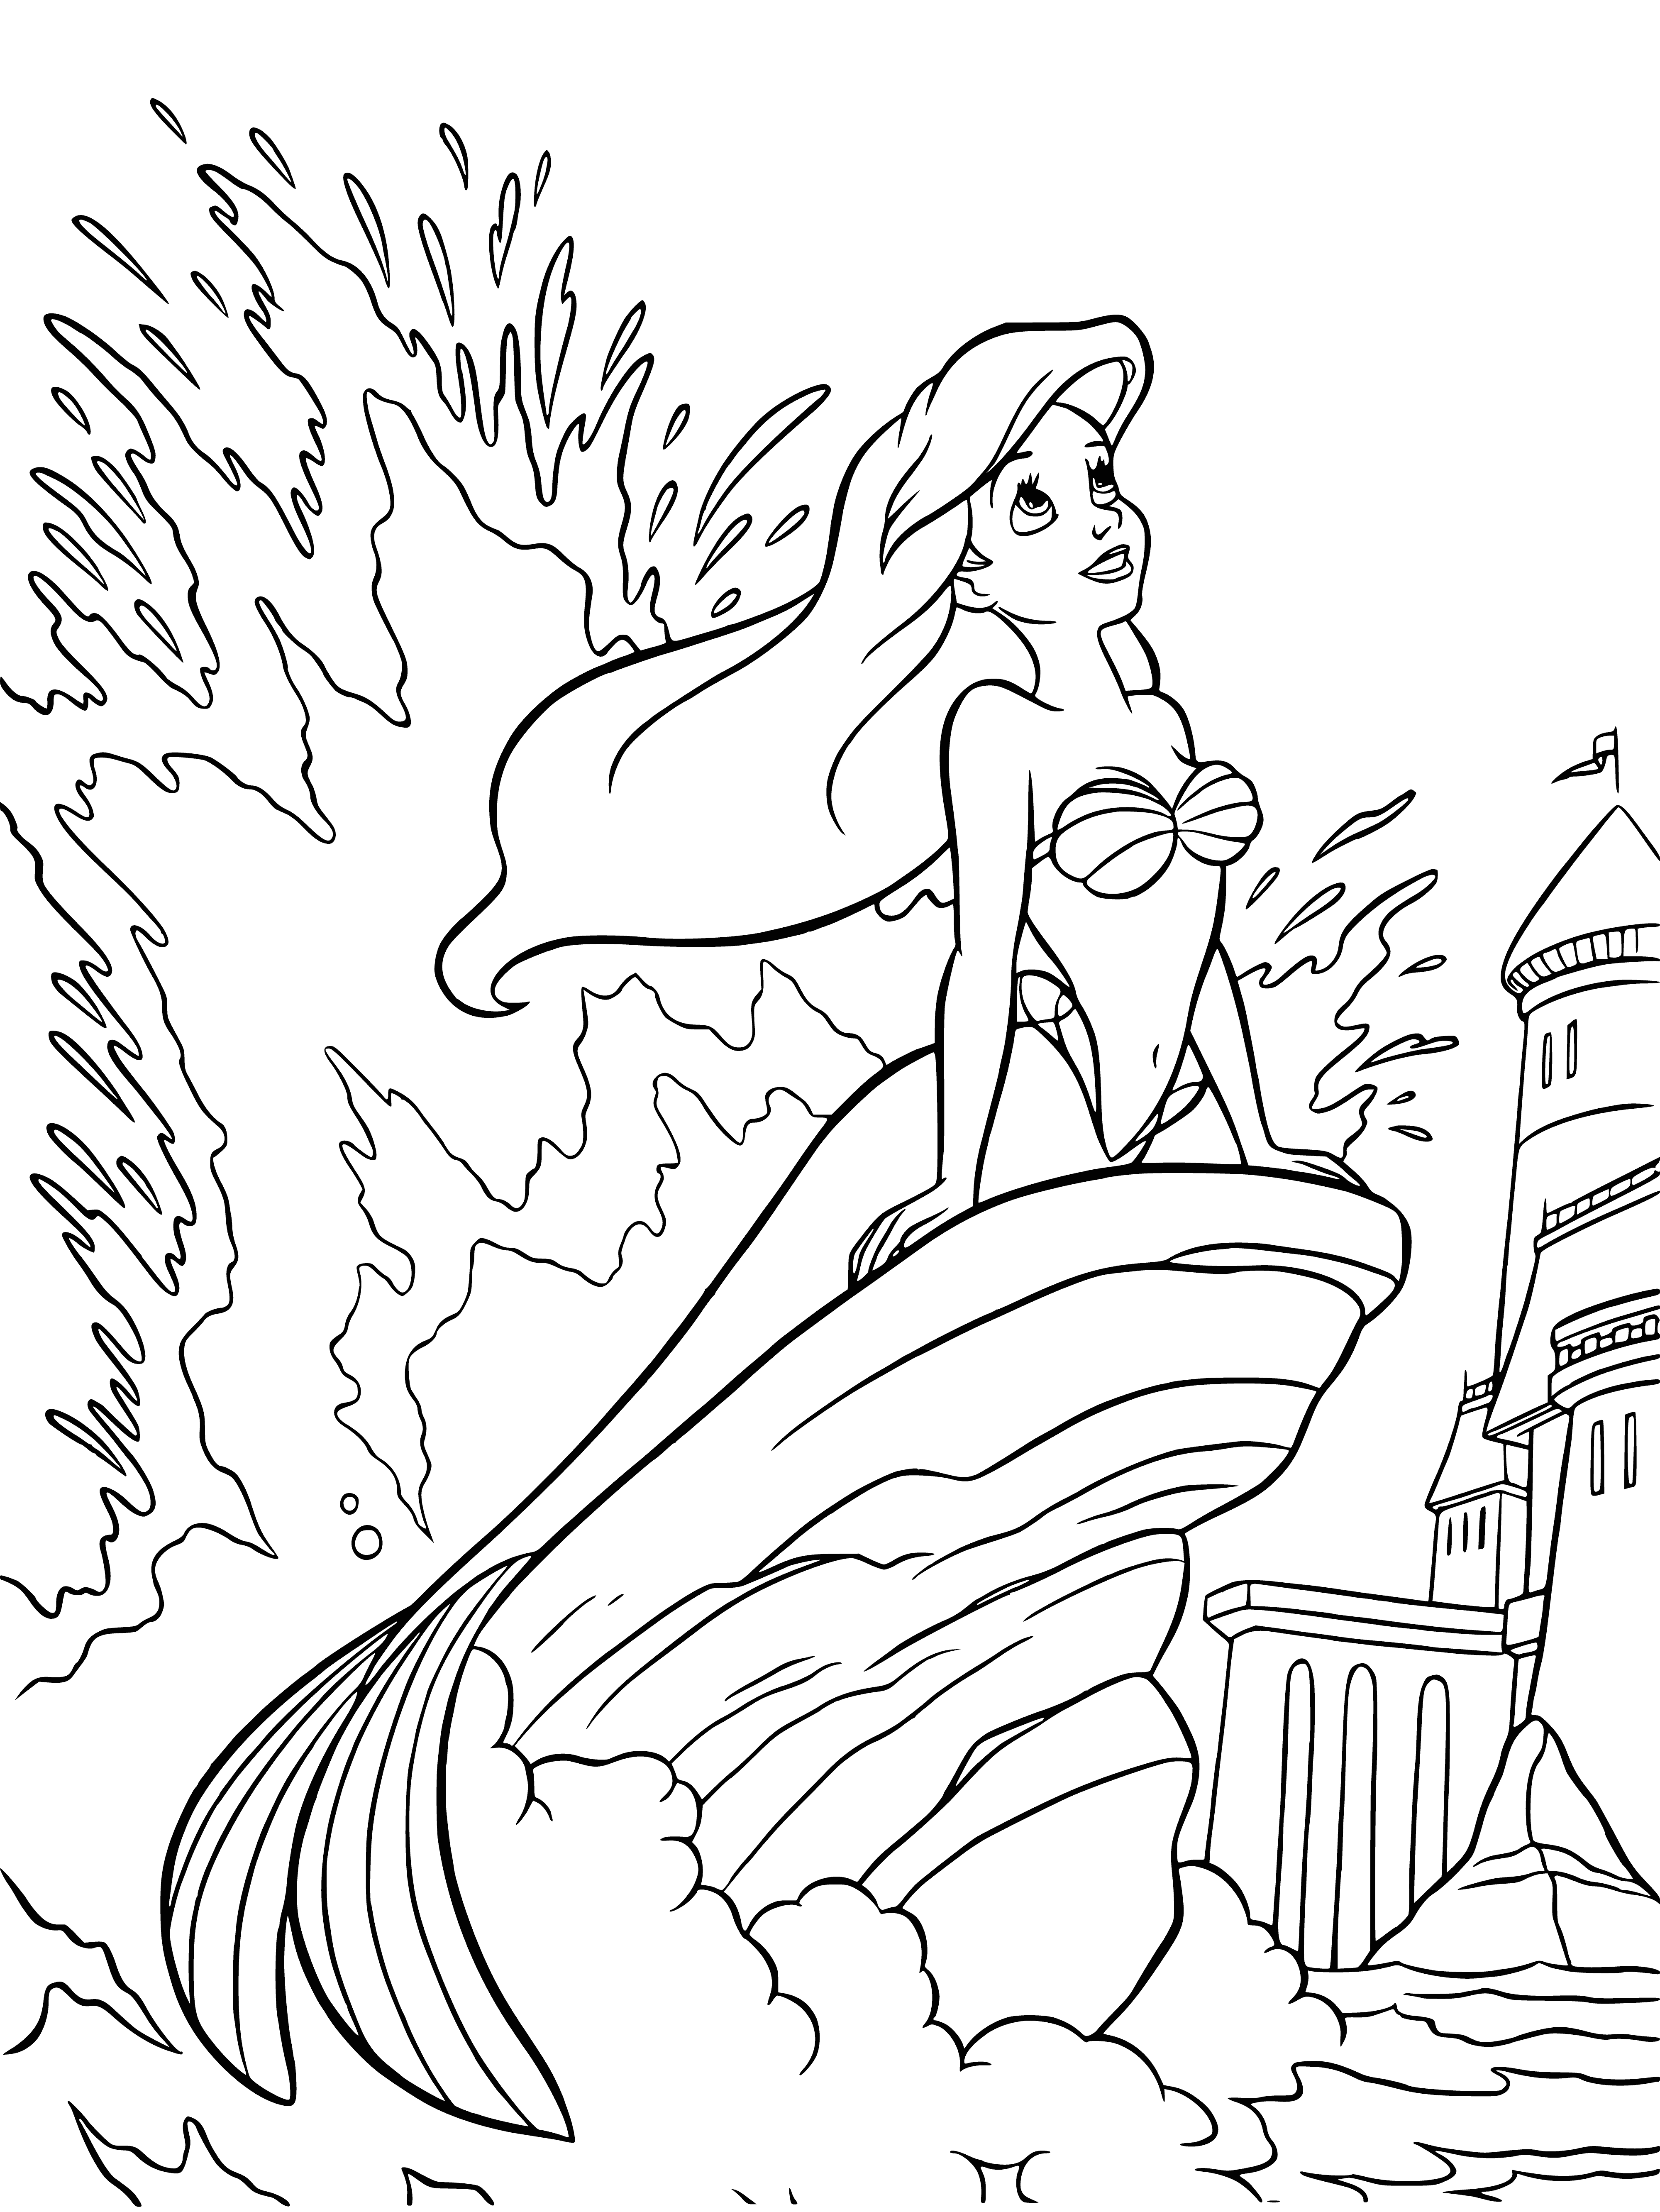 coloring page: Sad little mermaid sitting in a pool, wearing a purple bikini, green eyes, red hair and looking sadly into the sky. #MermaidLife